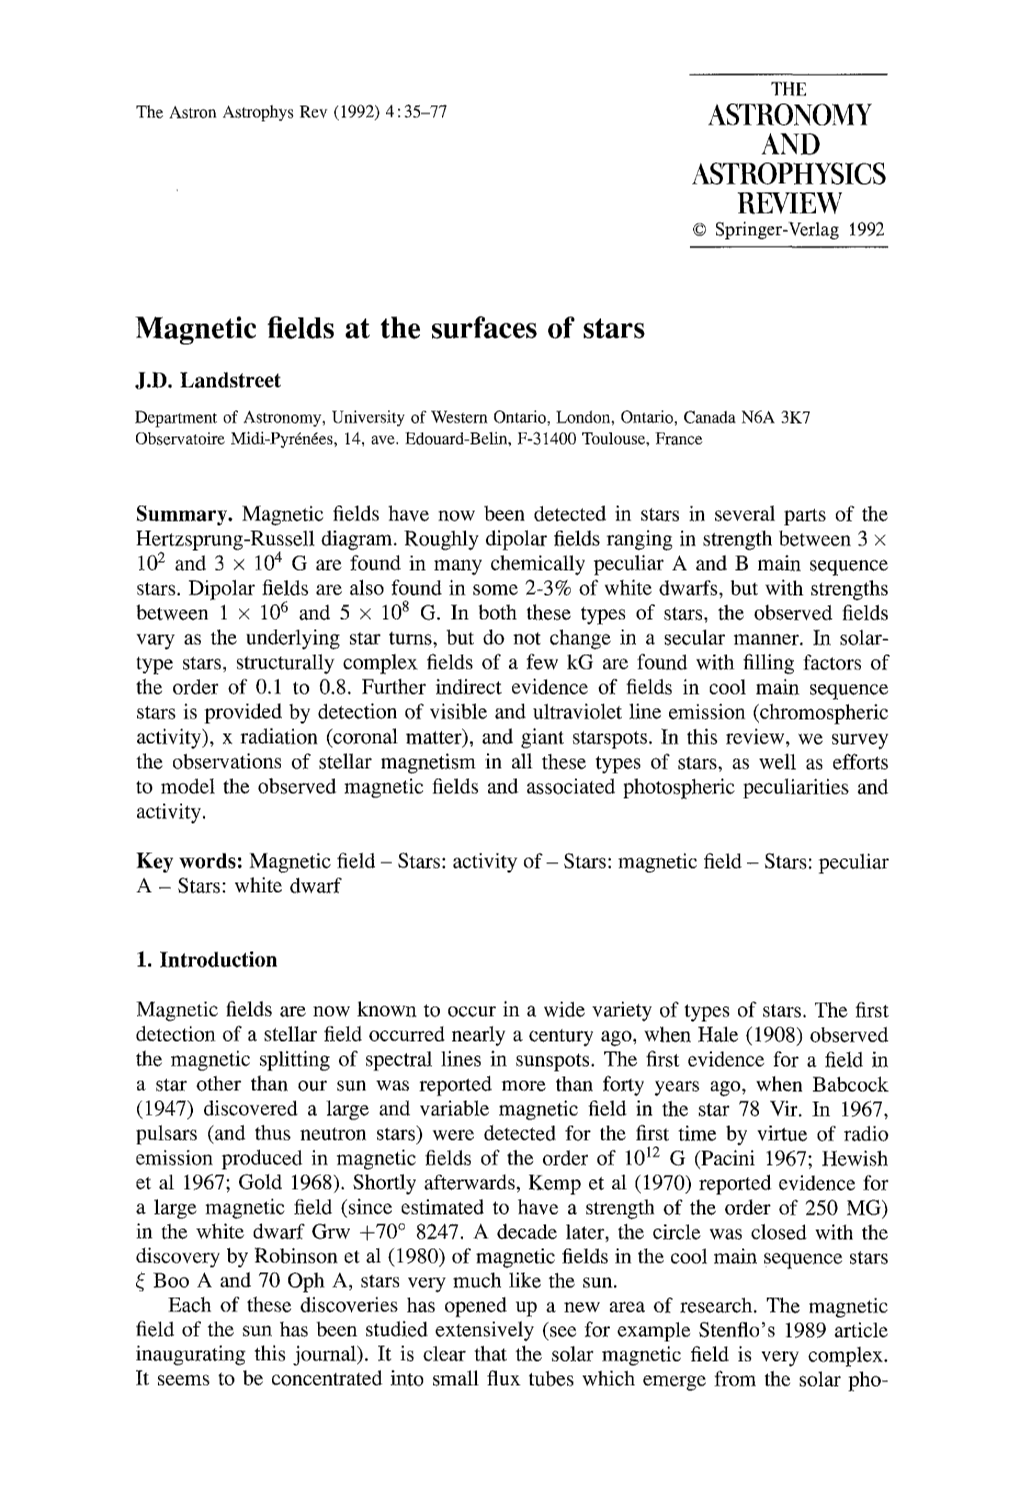 Magnetic Fields at the Surfaces of Stars